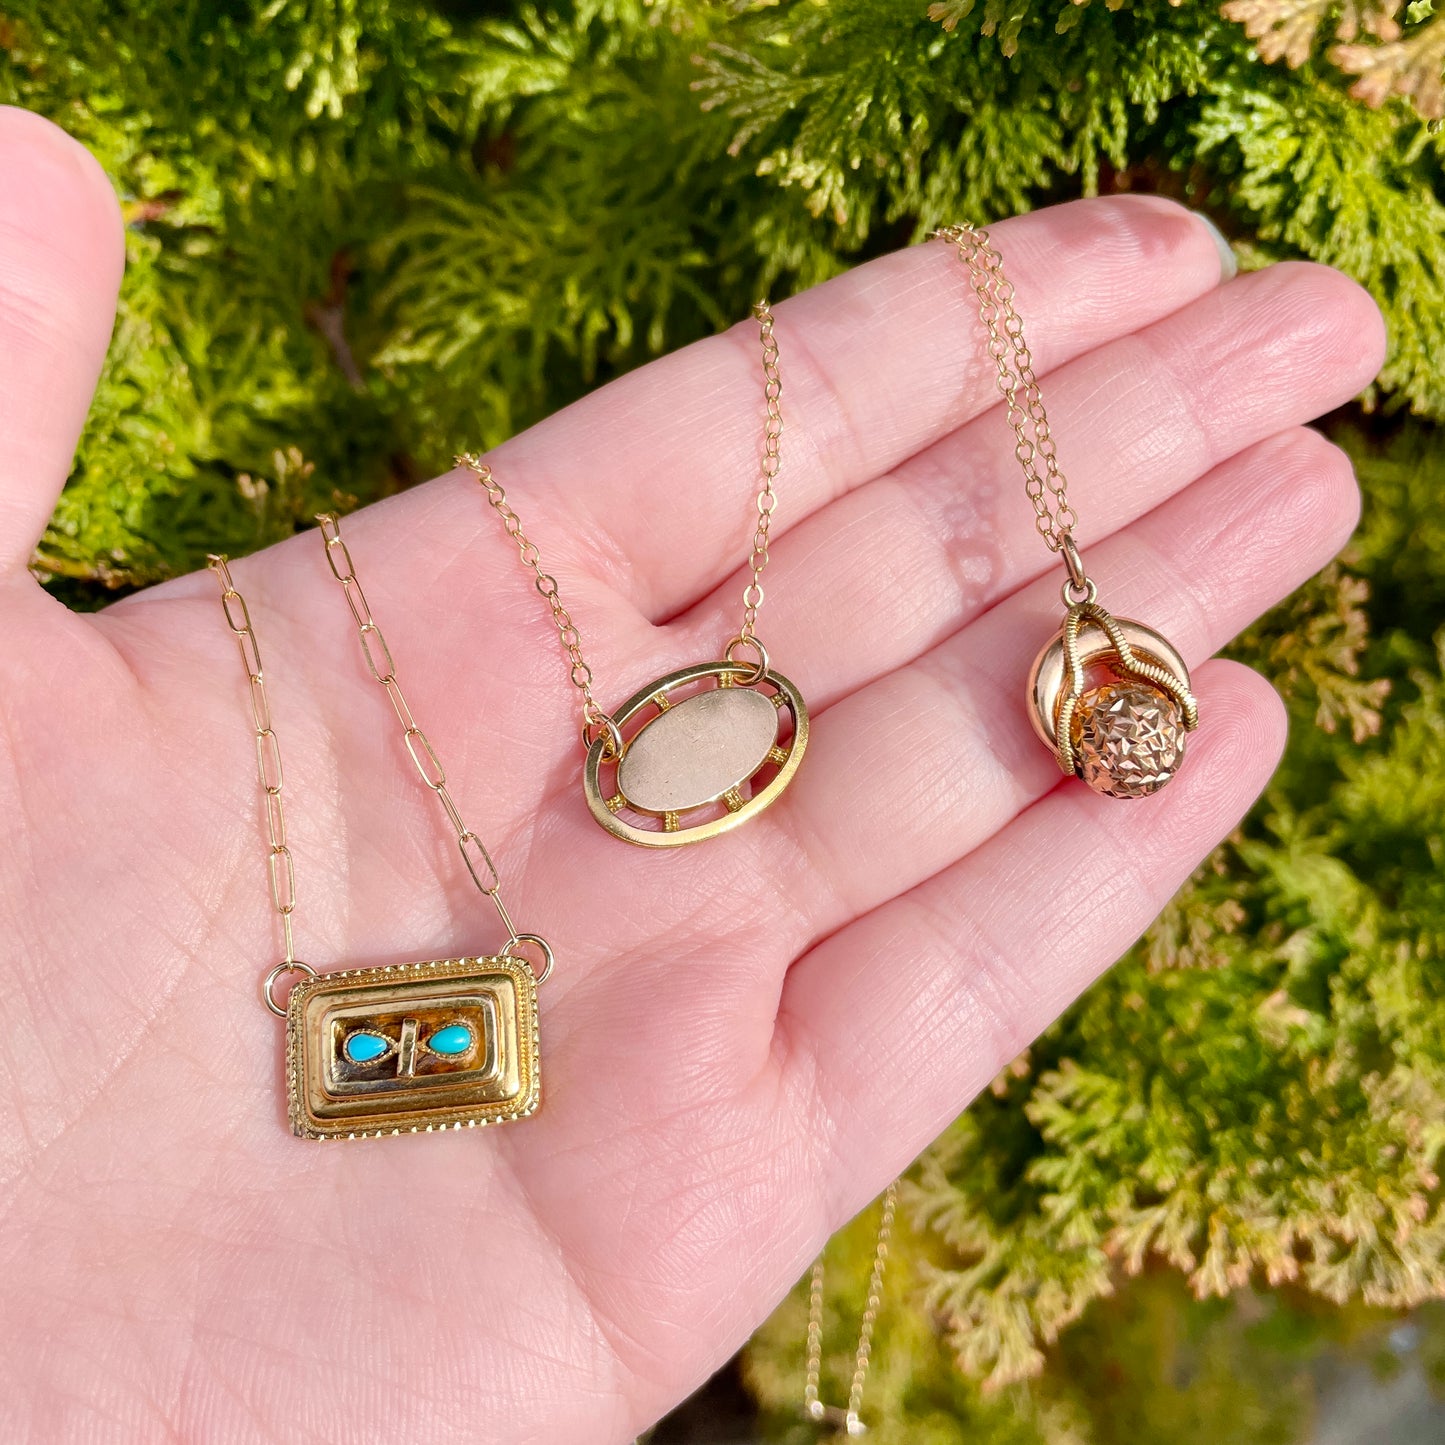 three small antique pendant necklaces held on the palm side of a hand against a green natural foliage background